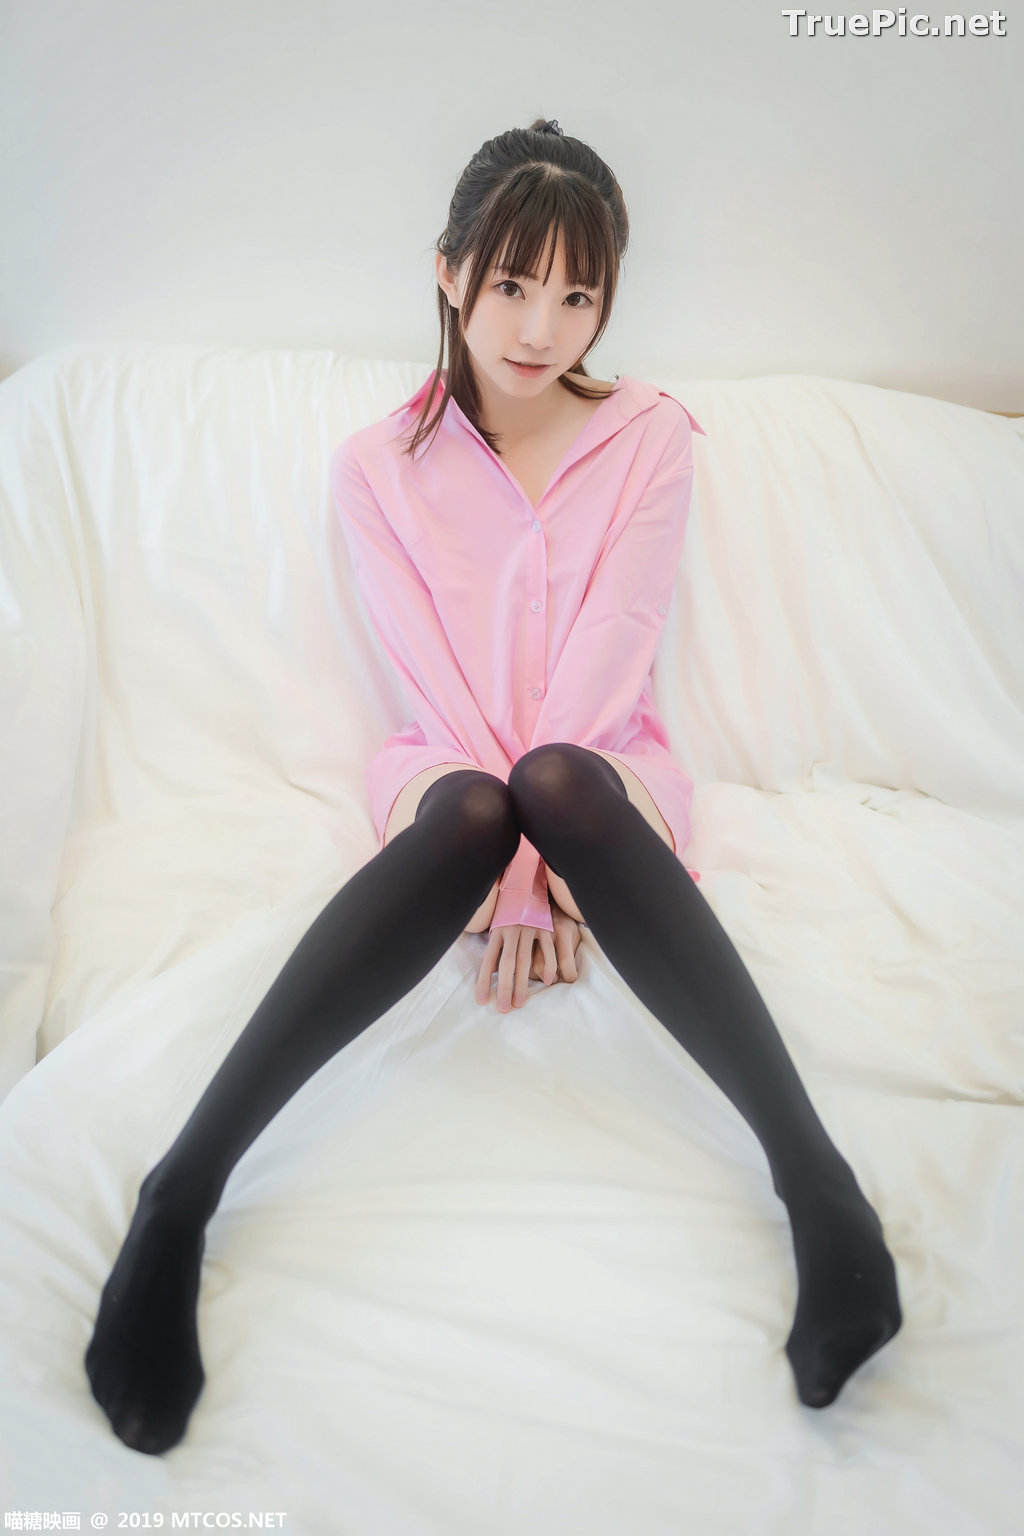 Image [MTCos] 喵糖映画 Vol.022 – Chinese Model – Pink Shirt and Black Stockings - TruePic.net - Picture-19